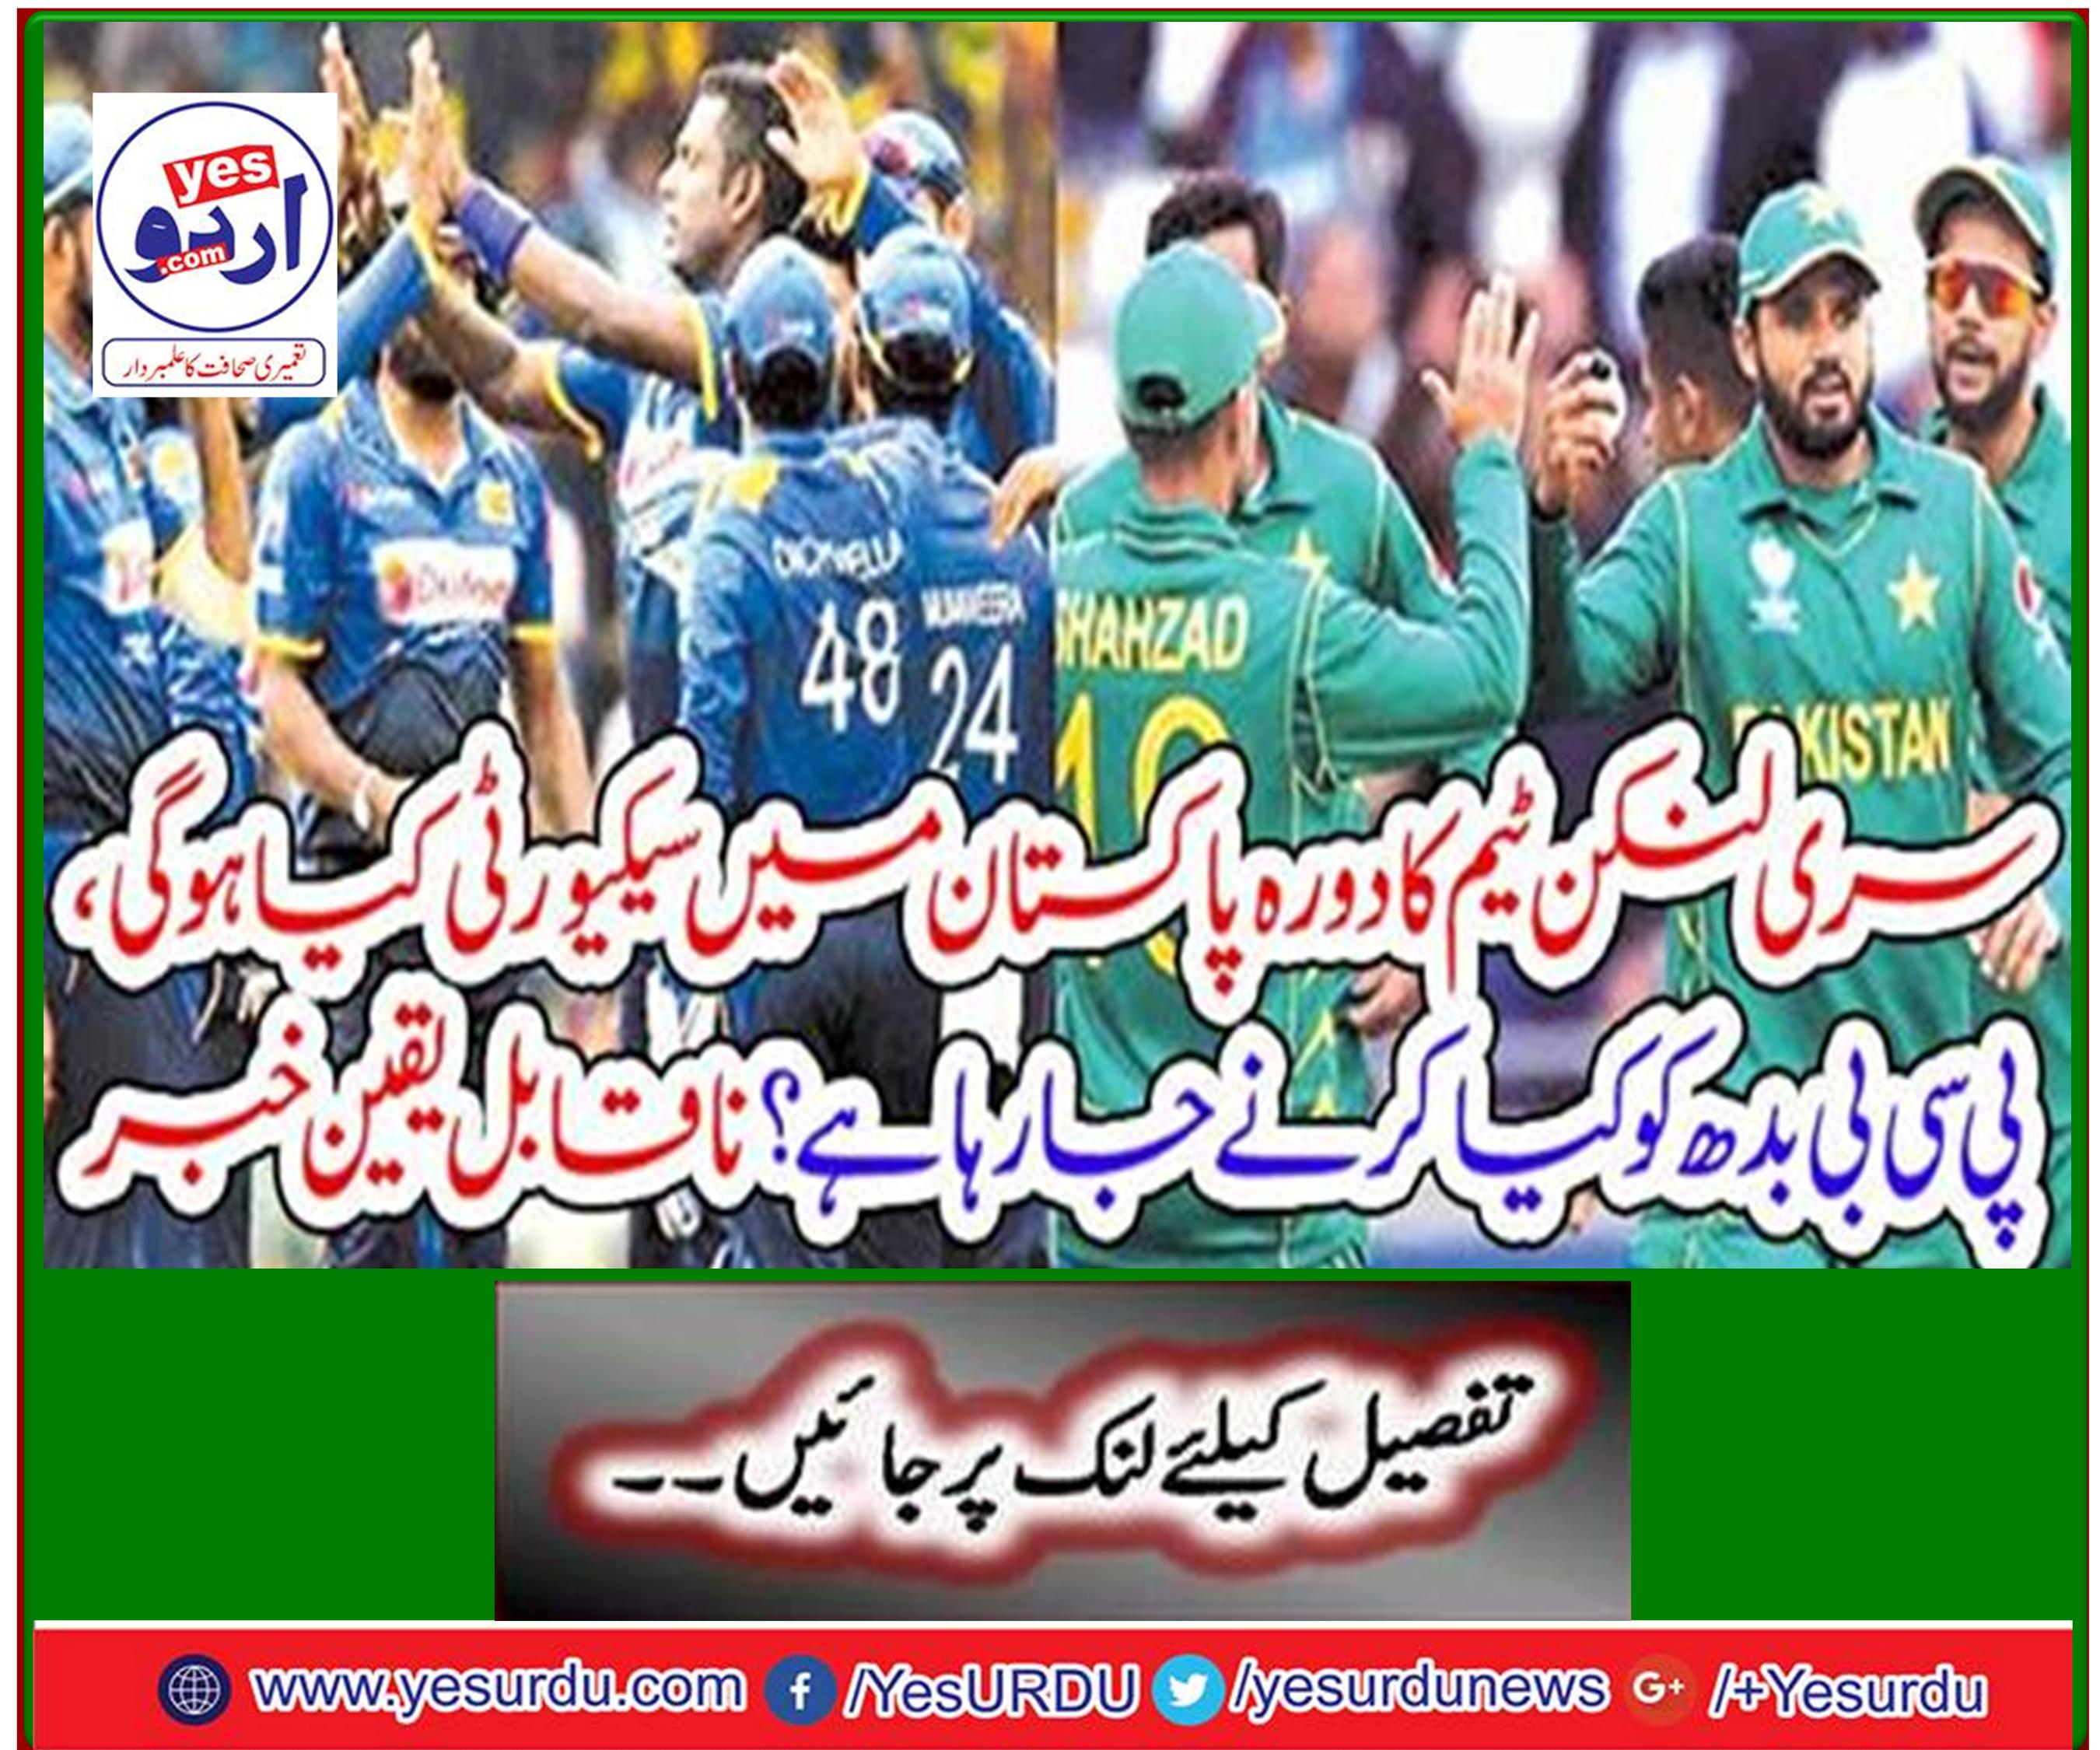 Sri Lanka team visits Pakistan What will be the security, what is PCB going to do on Wednesday? Incredible news